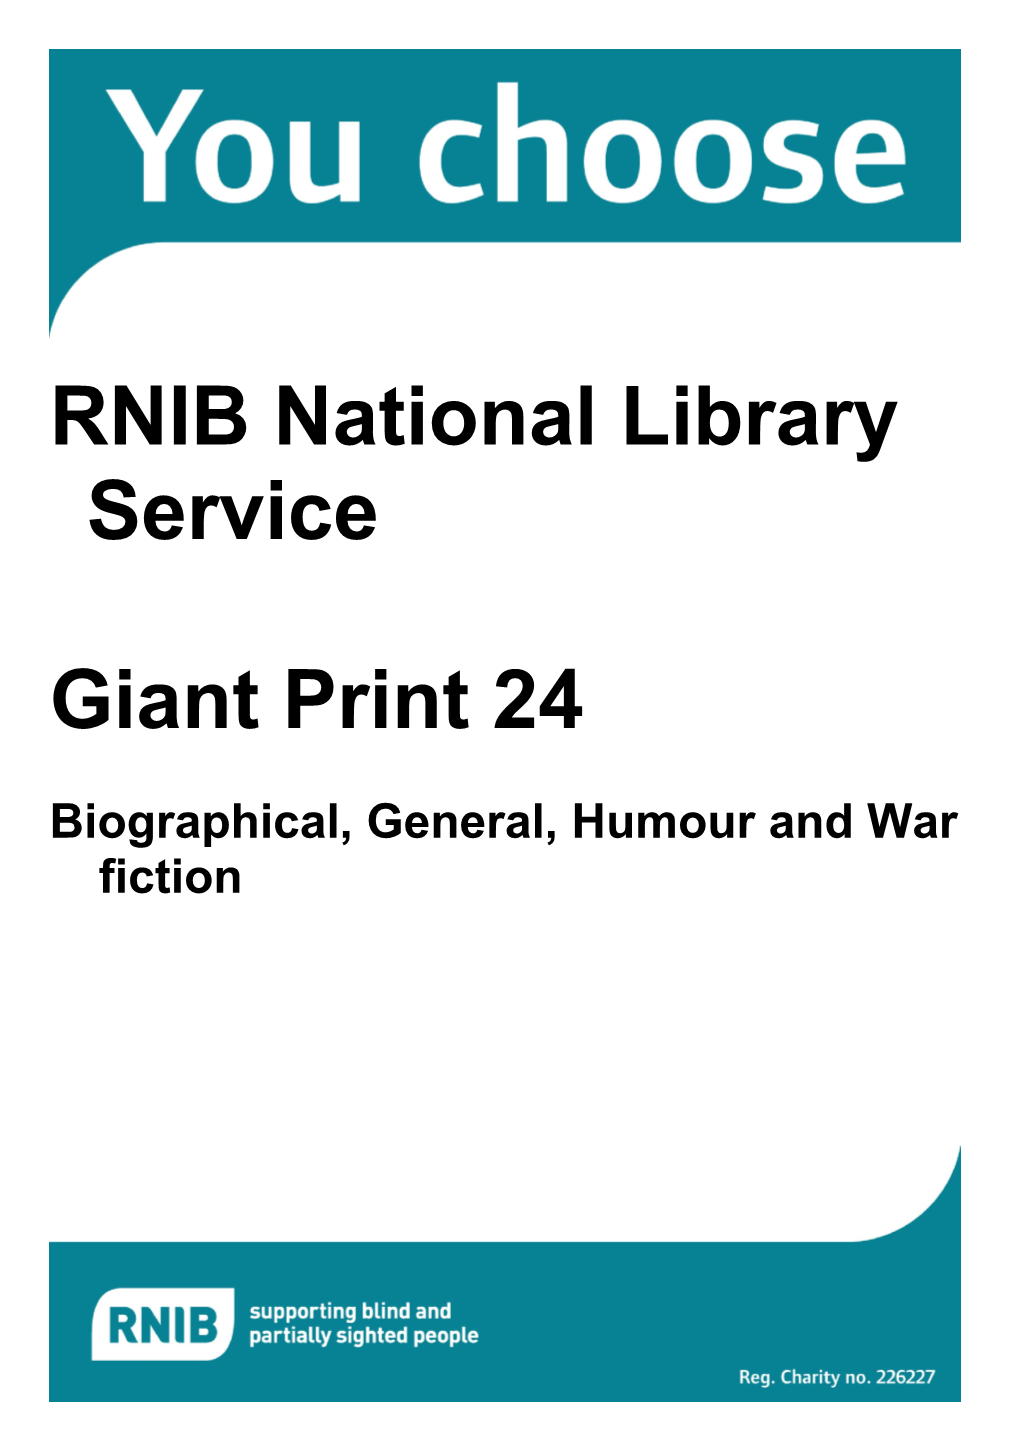 Biographical, General, Humour, War Fiction Book List for Giant Print (Word)